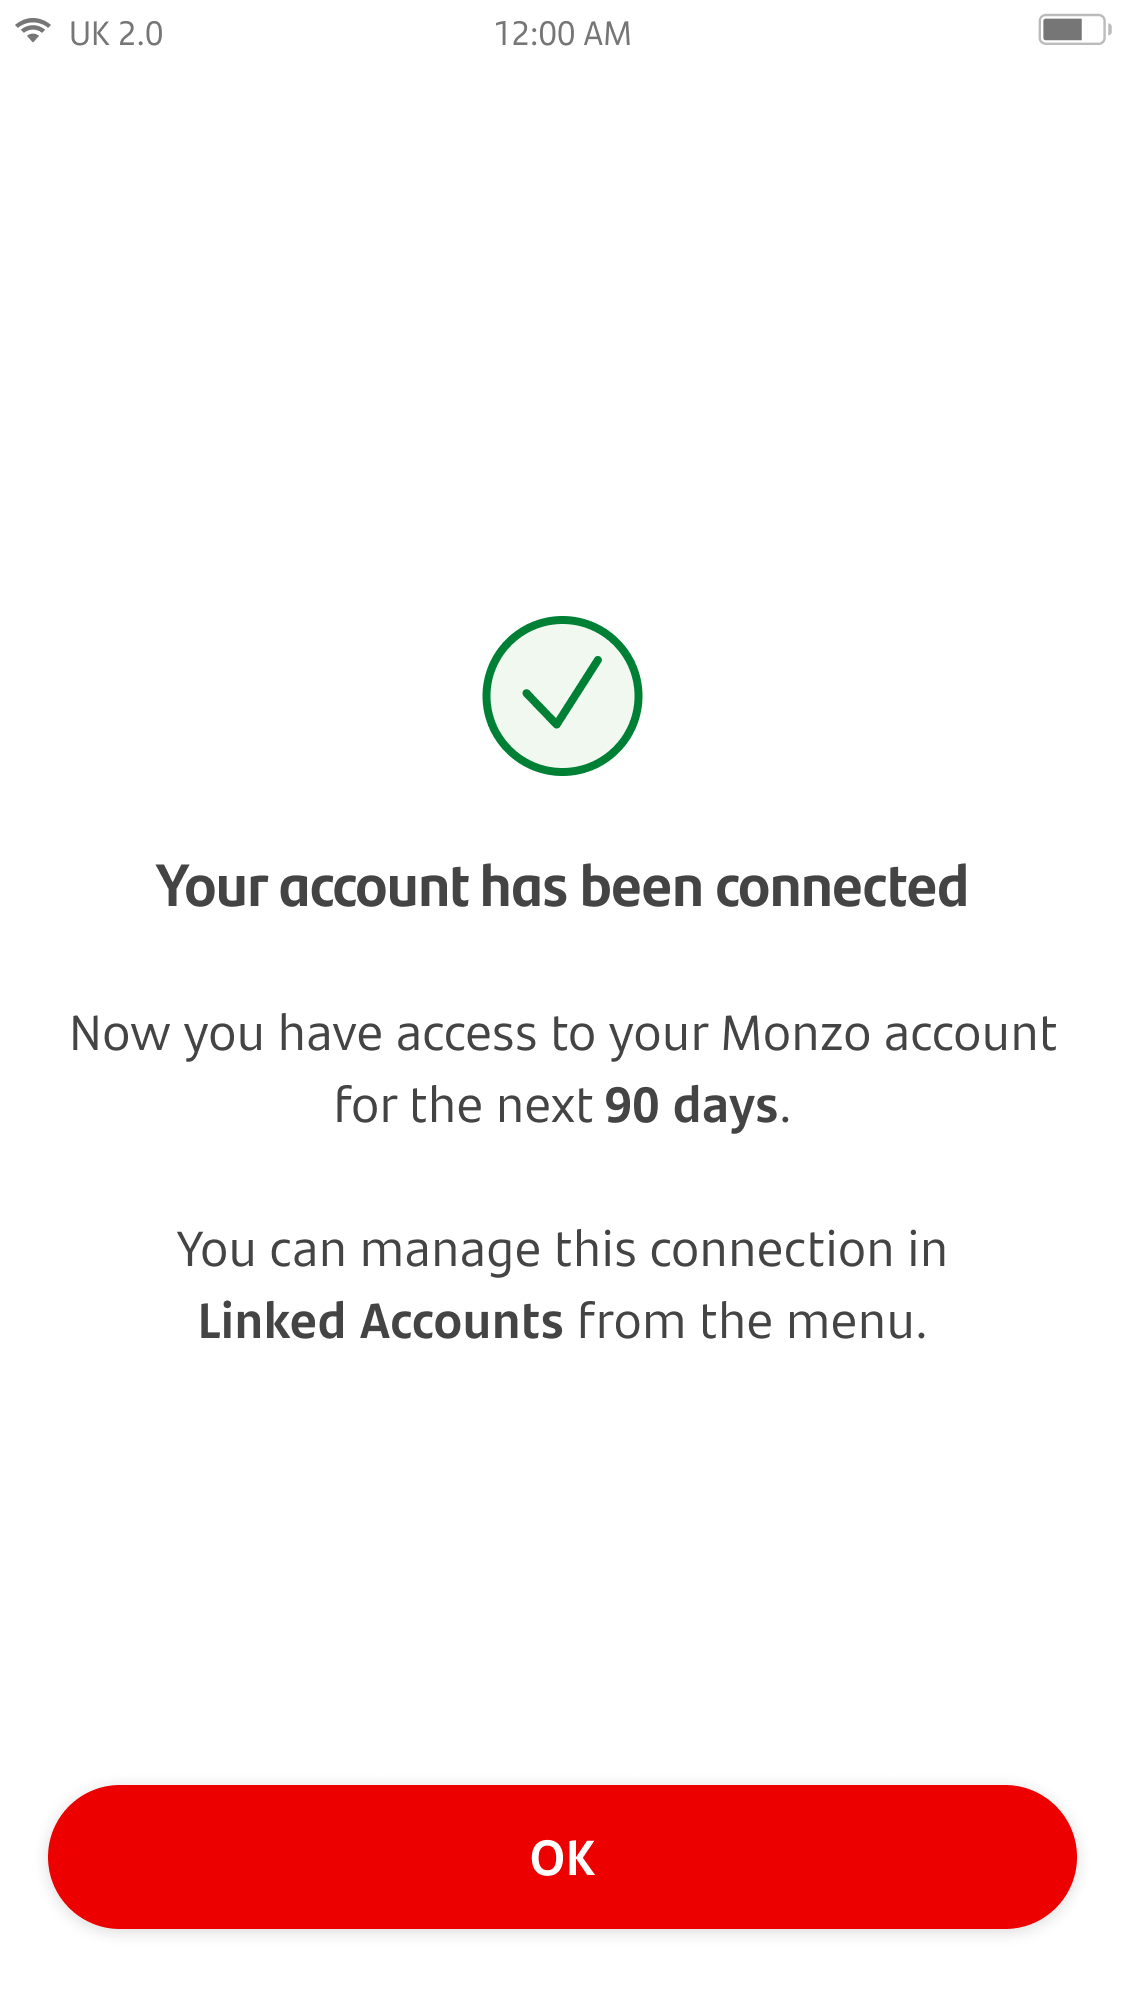 Success screen for connecting an account with another provider.